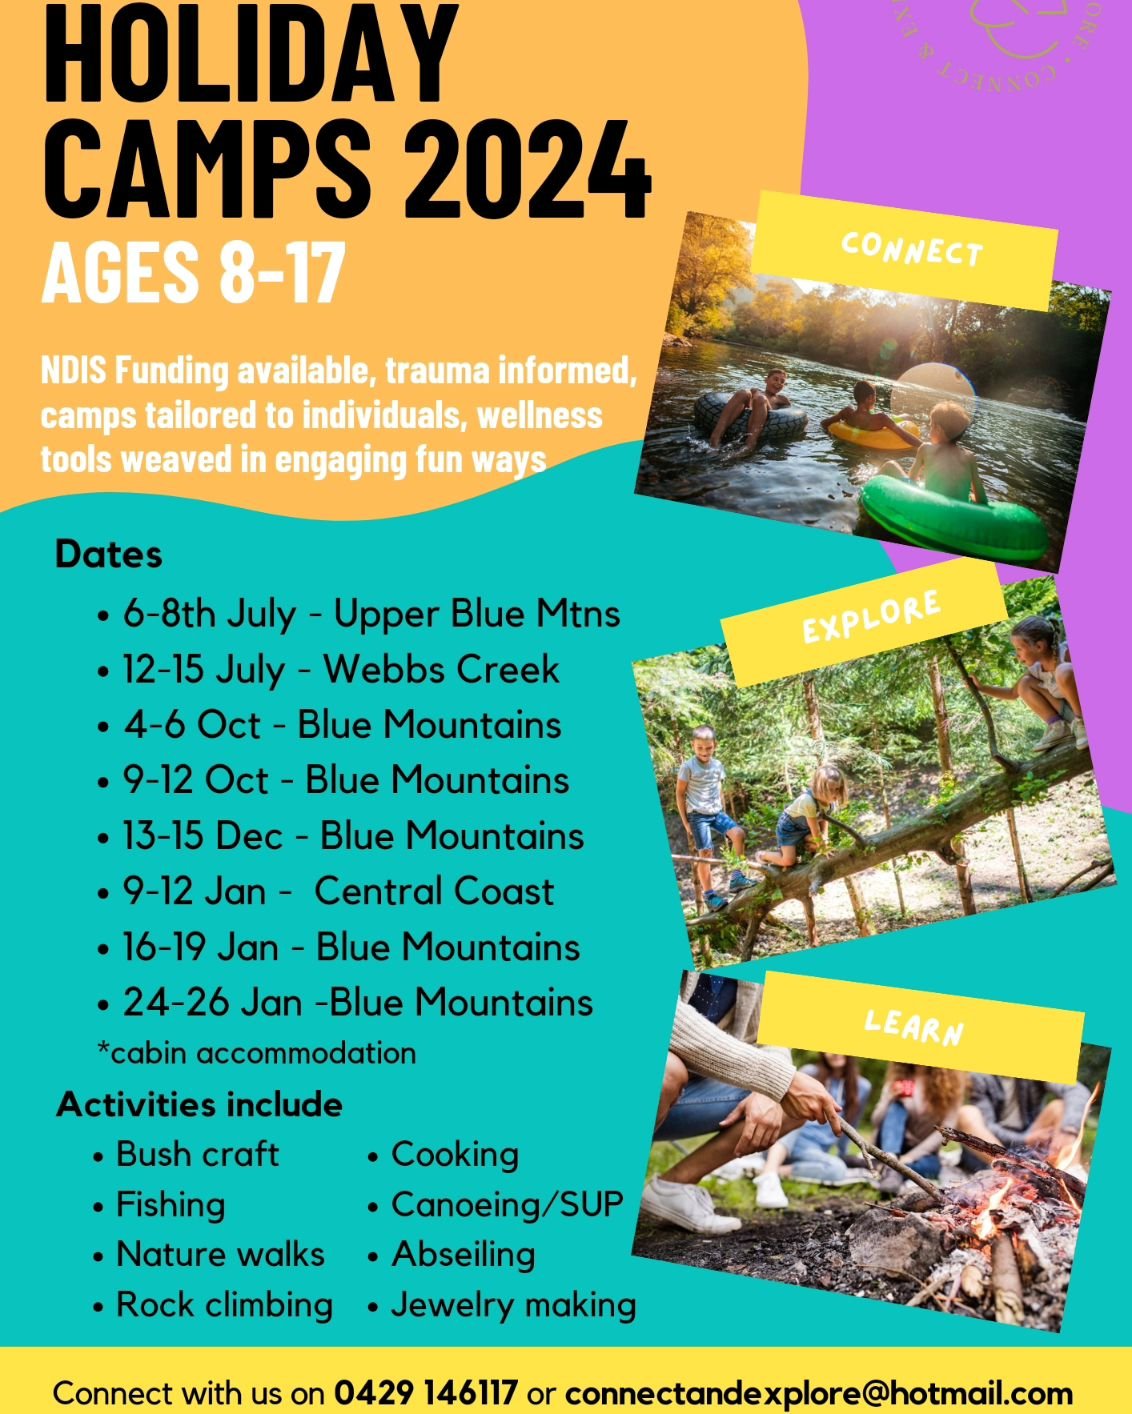 Wooohoo, next camp dates have touched down. Reach out to save your spots. I'm super stoked and excited planning the next adventures. 

Camps are 
✨️fun 
✨️small groups to make friends easily
✨️nature based
✨️tailored to each individual
✨️can provide 